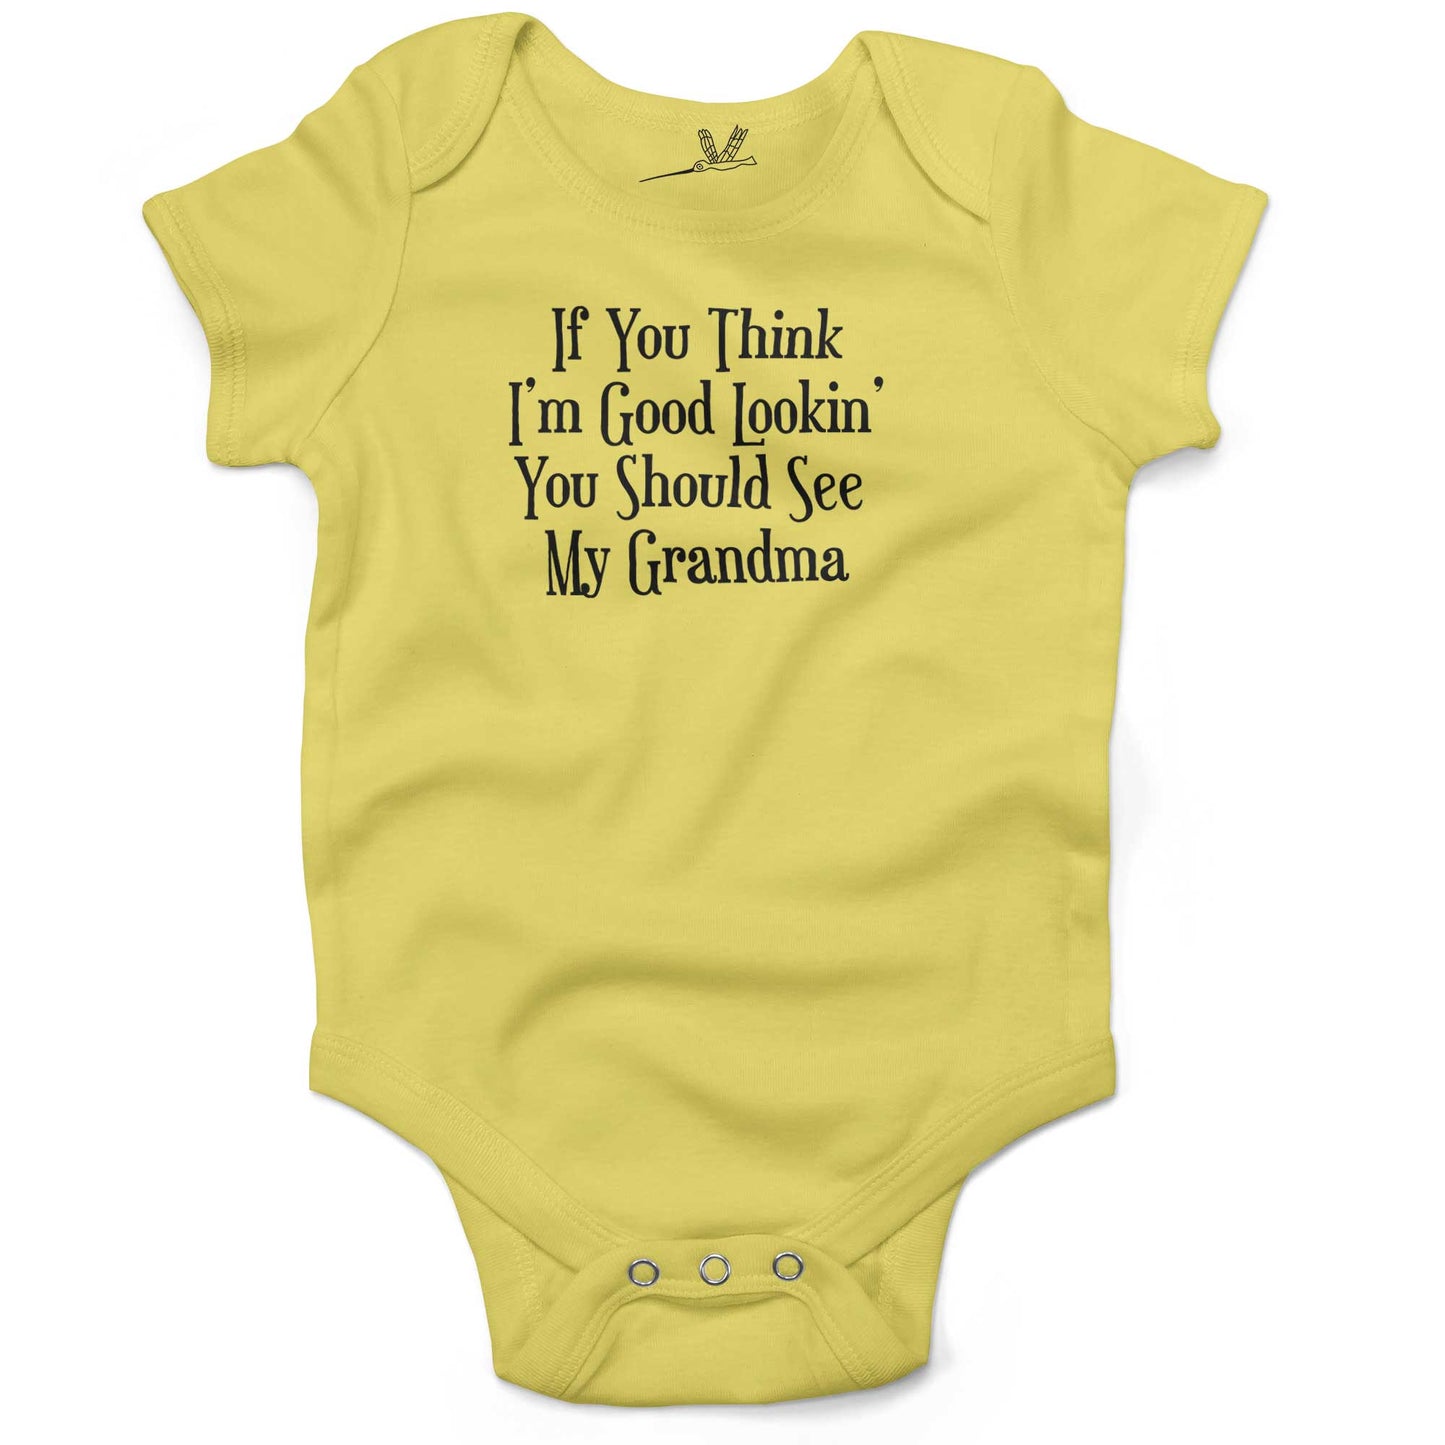 If You Think I'm Good Lookin', You Should See My Grandma Infant Bodysuit or Raglan Tee-Yellow-3-6 months